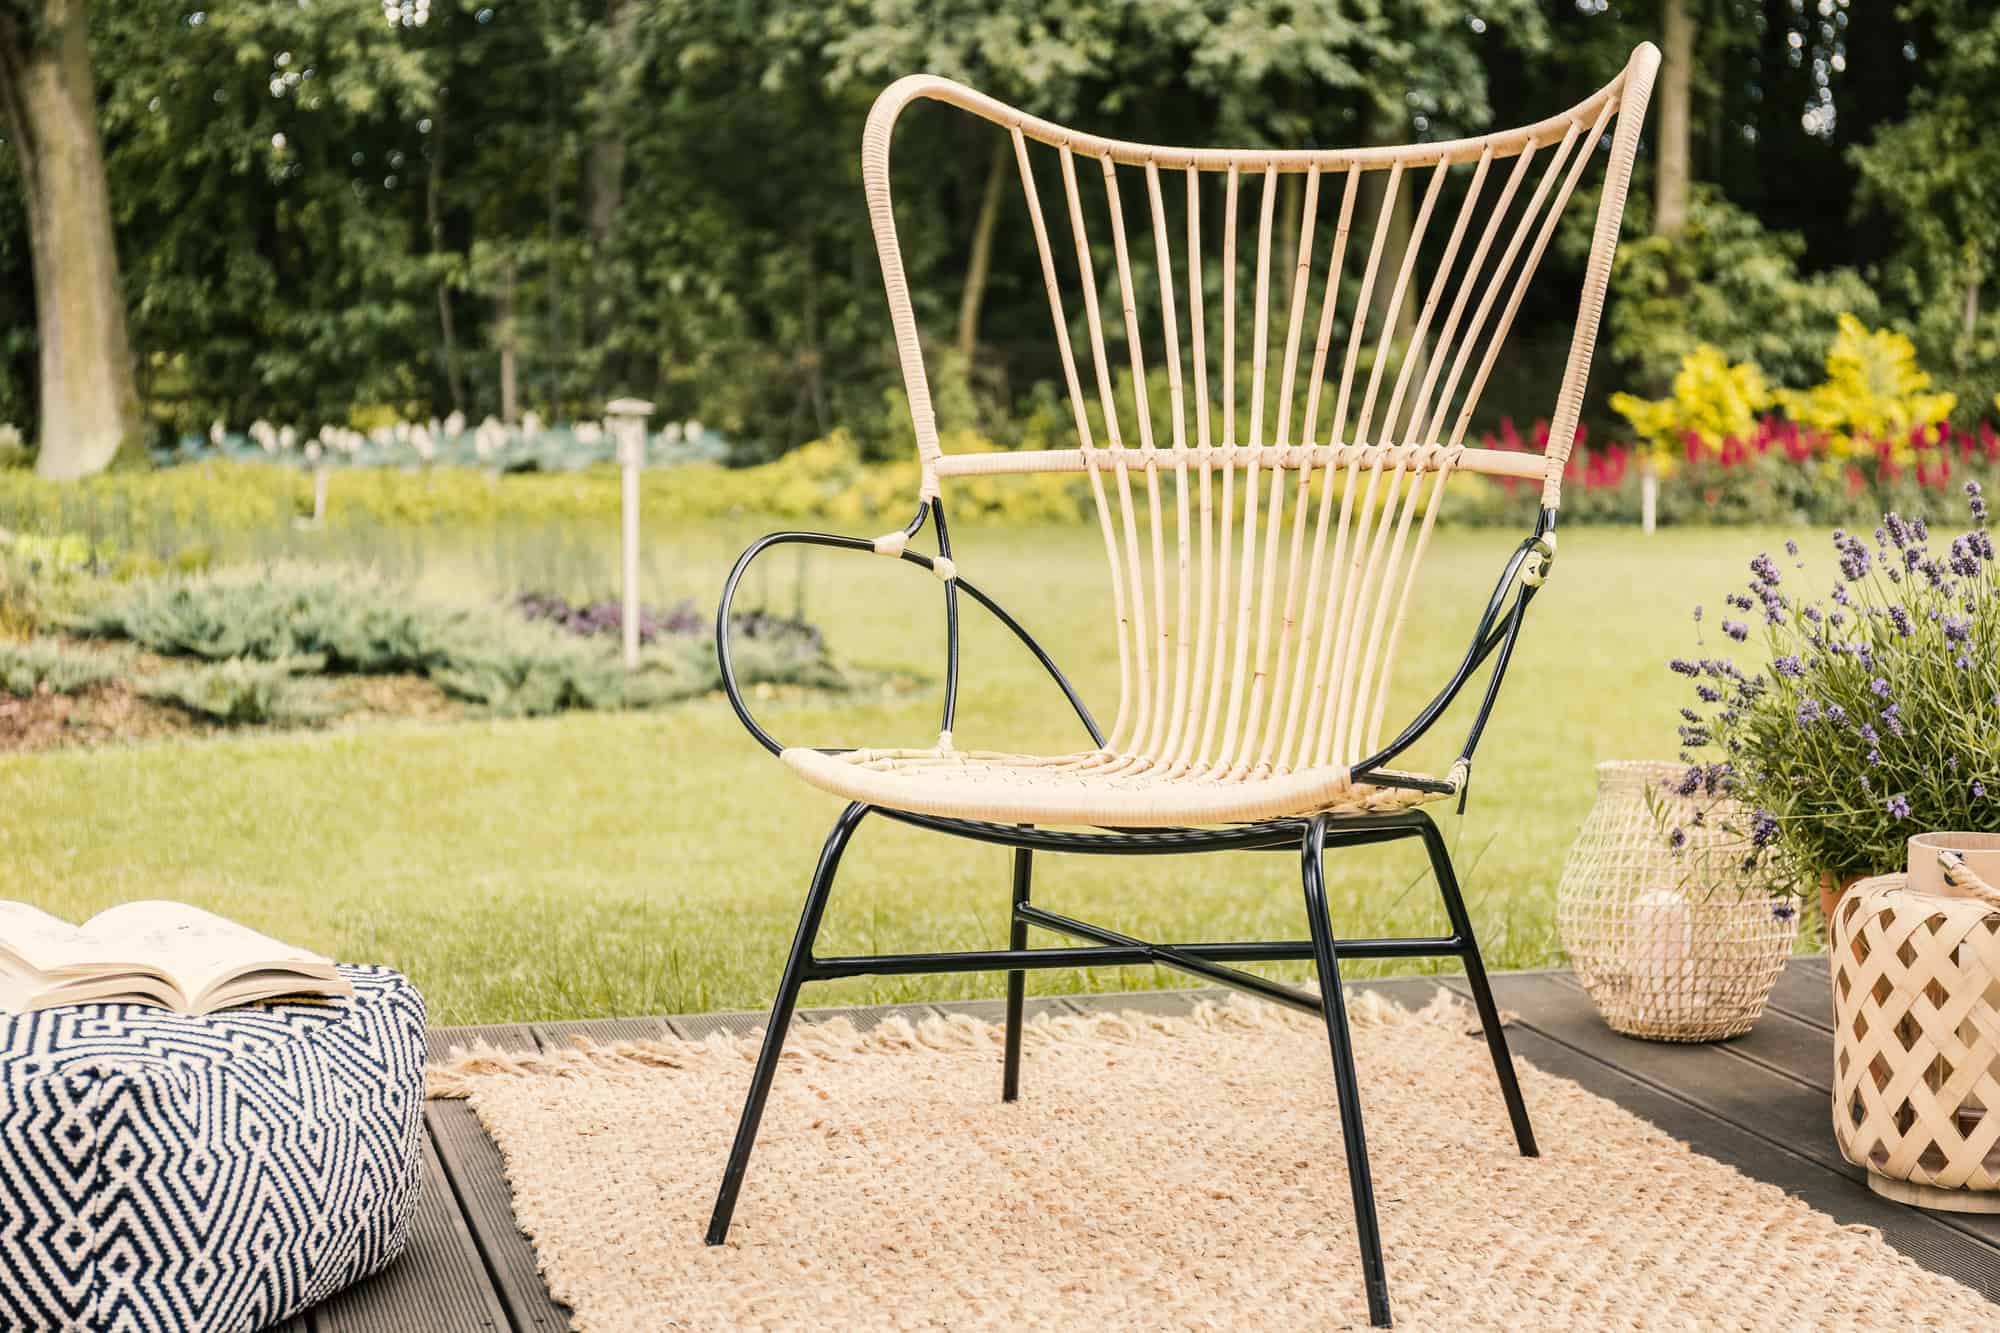 The Complete Guide to Choosing Outdoor Rugs